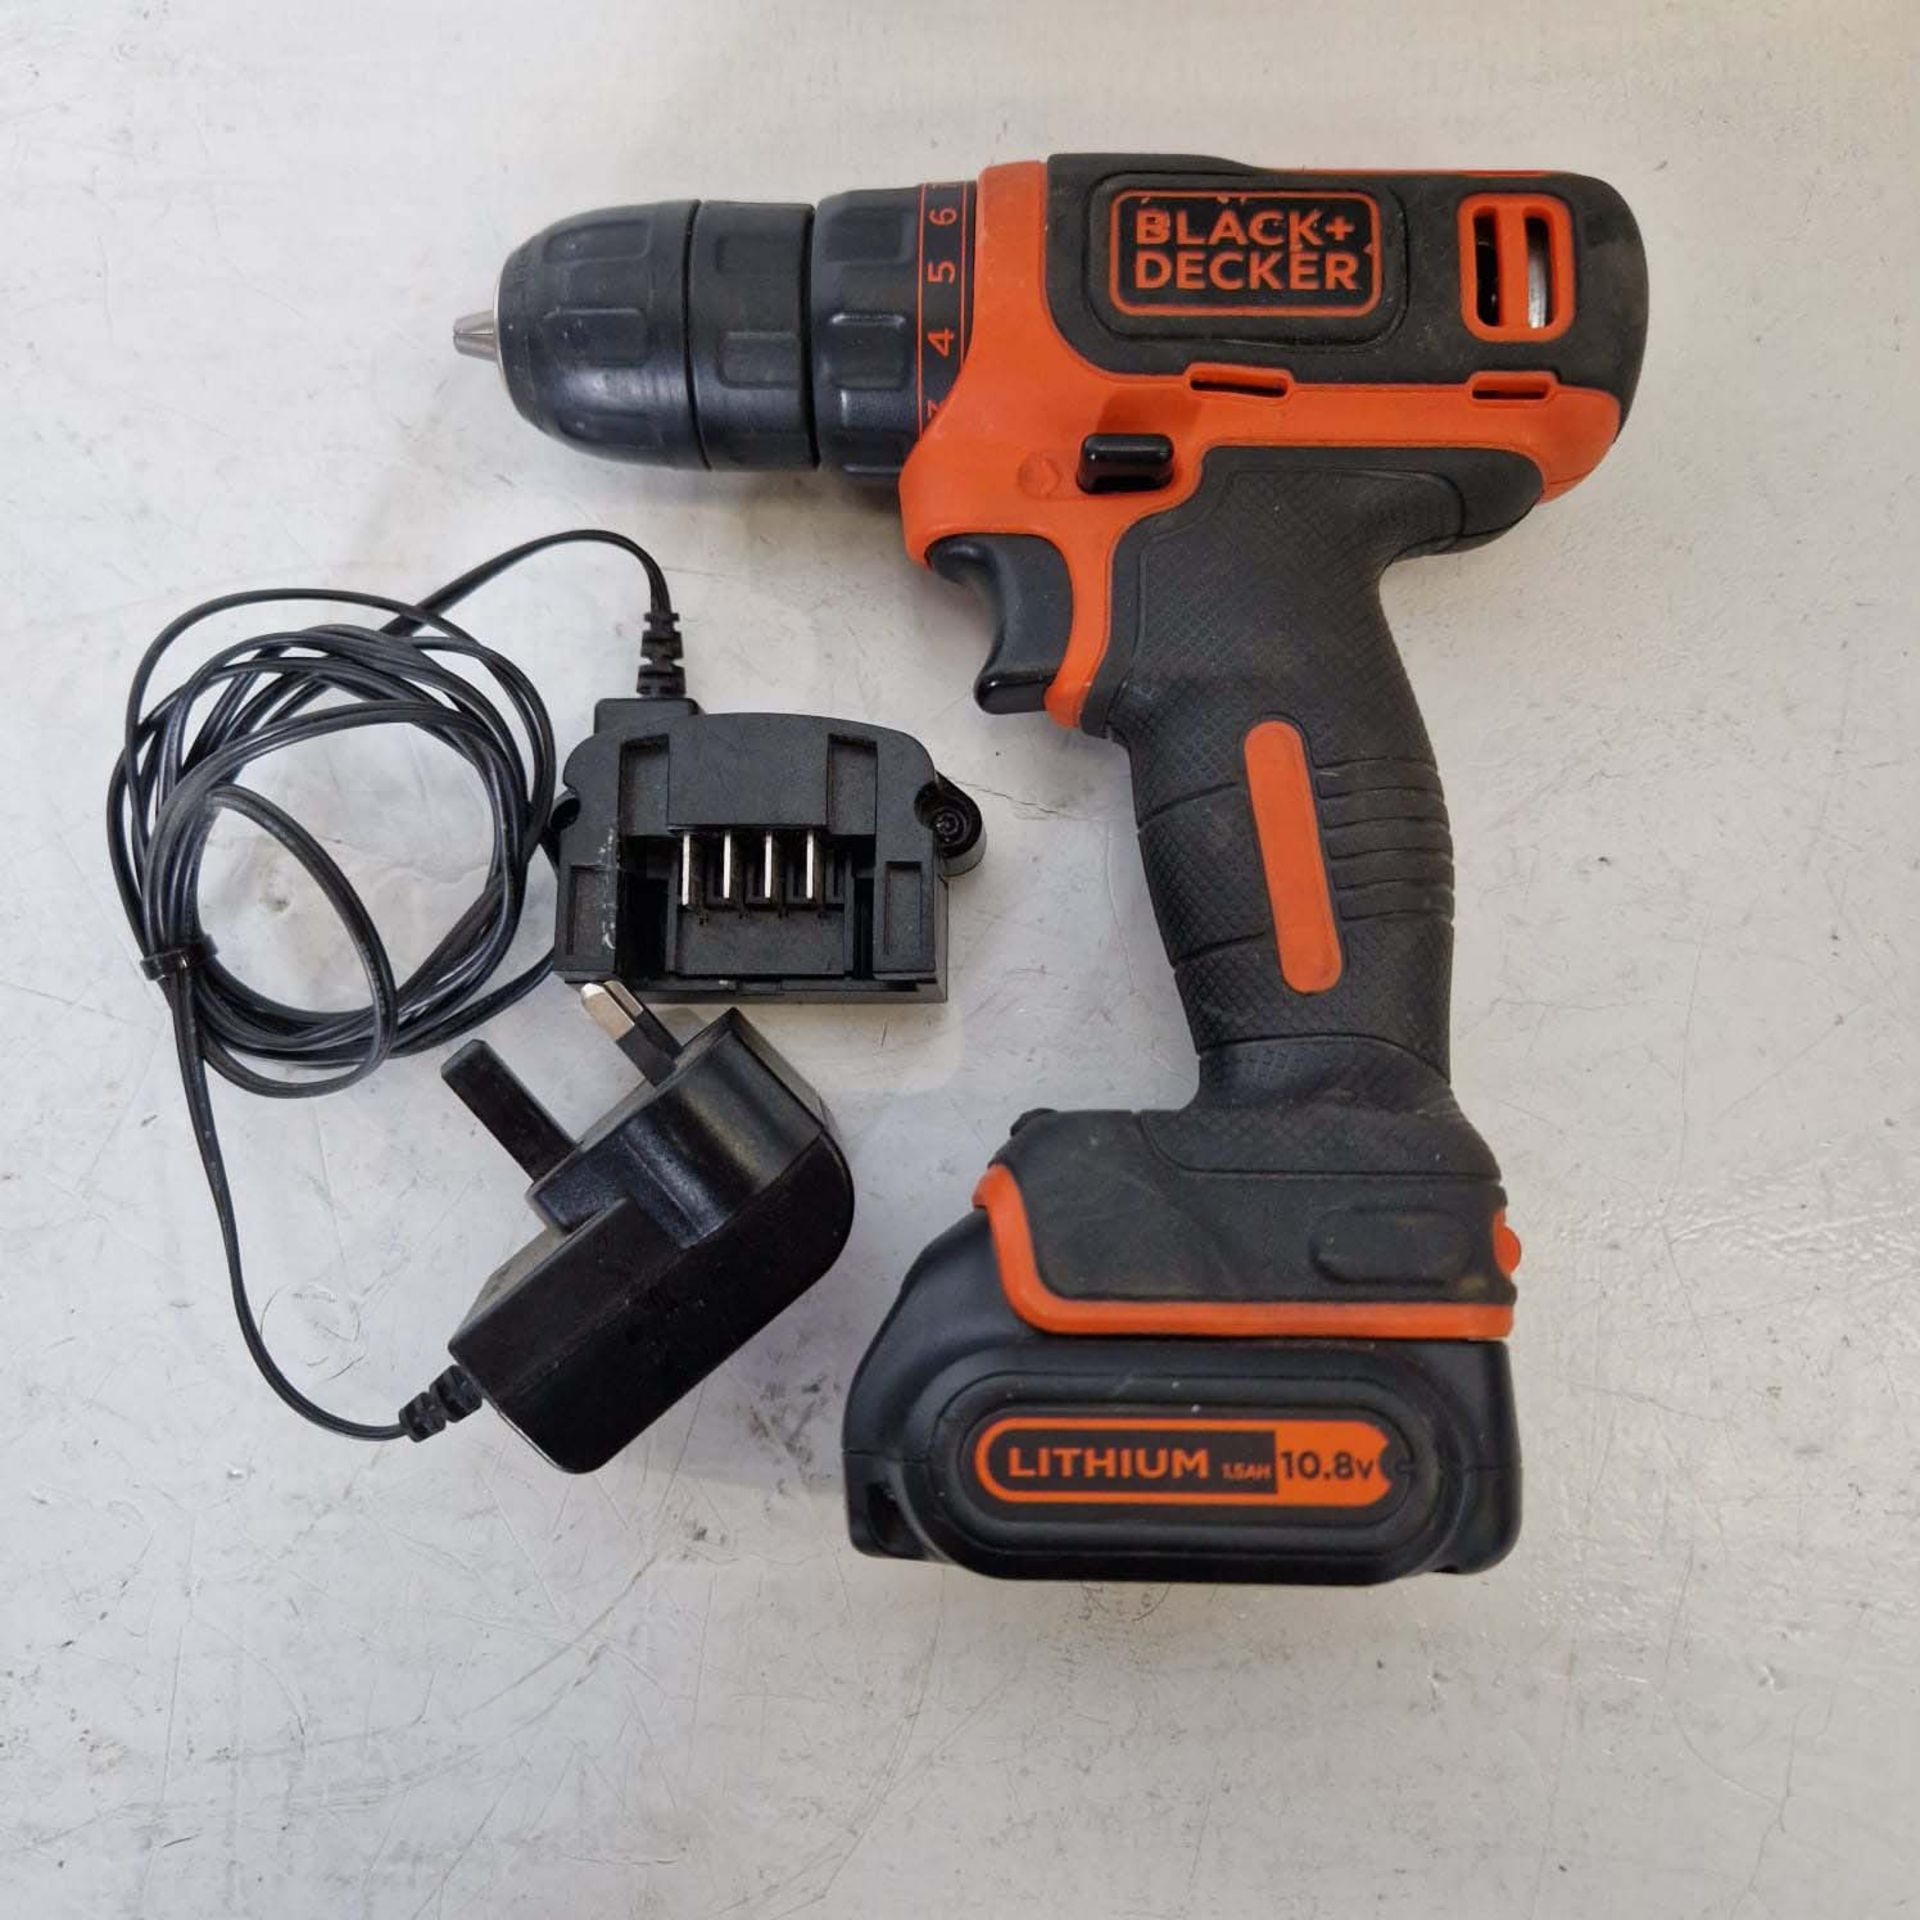 Black & Decker Model BDCDD12 Cordless Drill with Lithium 10.8V Battery & Charger. Capacity 10mm. - Bild 2 aus 4